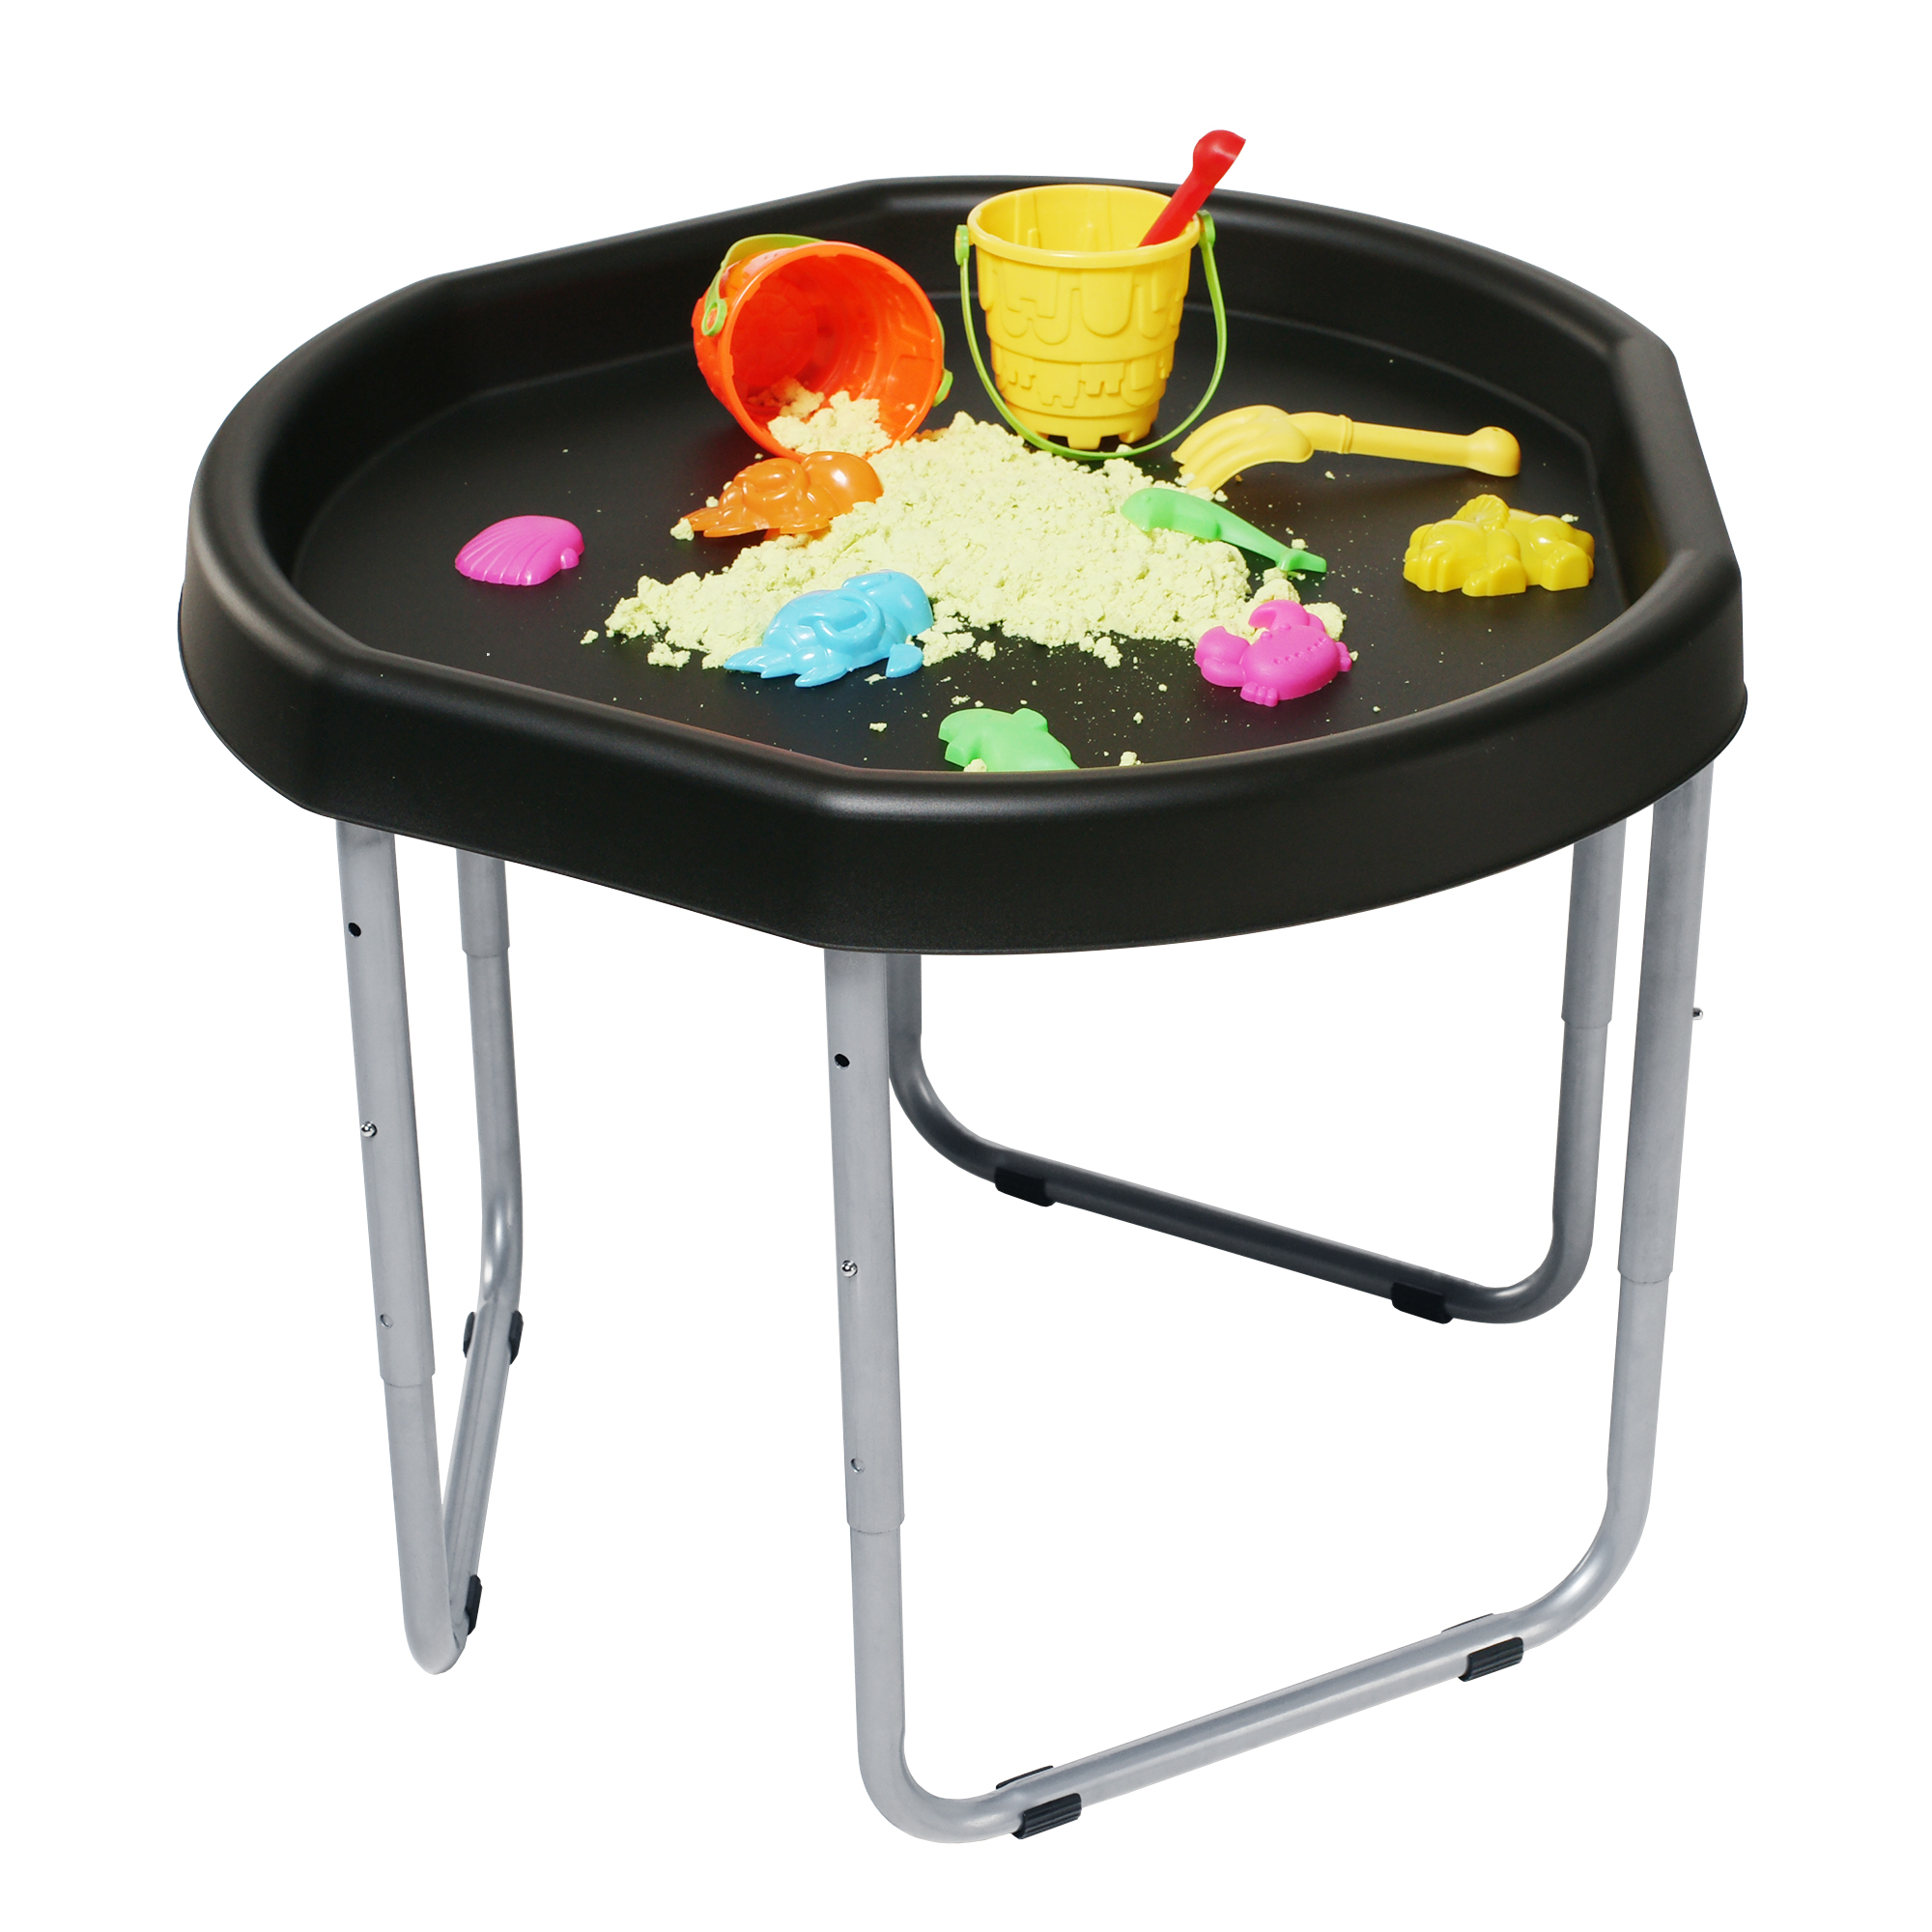 Black Tuff Tray and Adjustable Stand